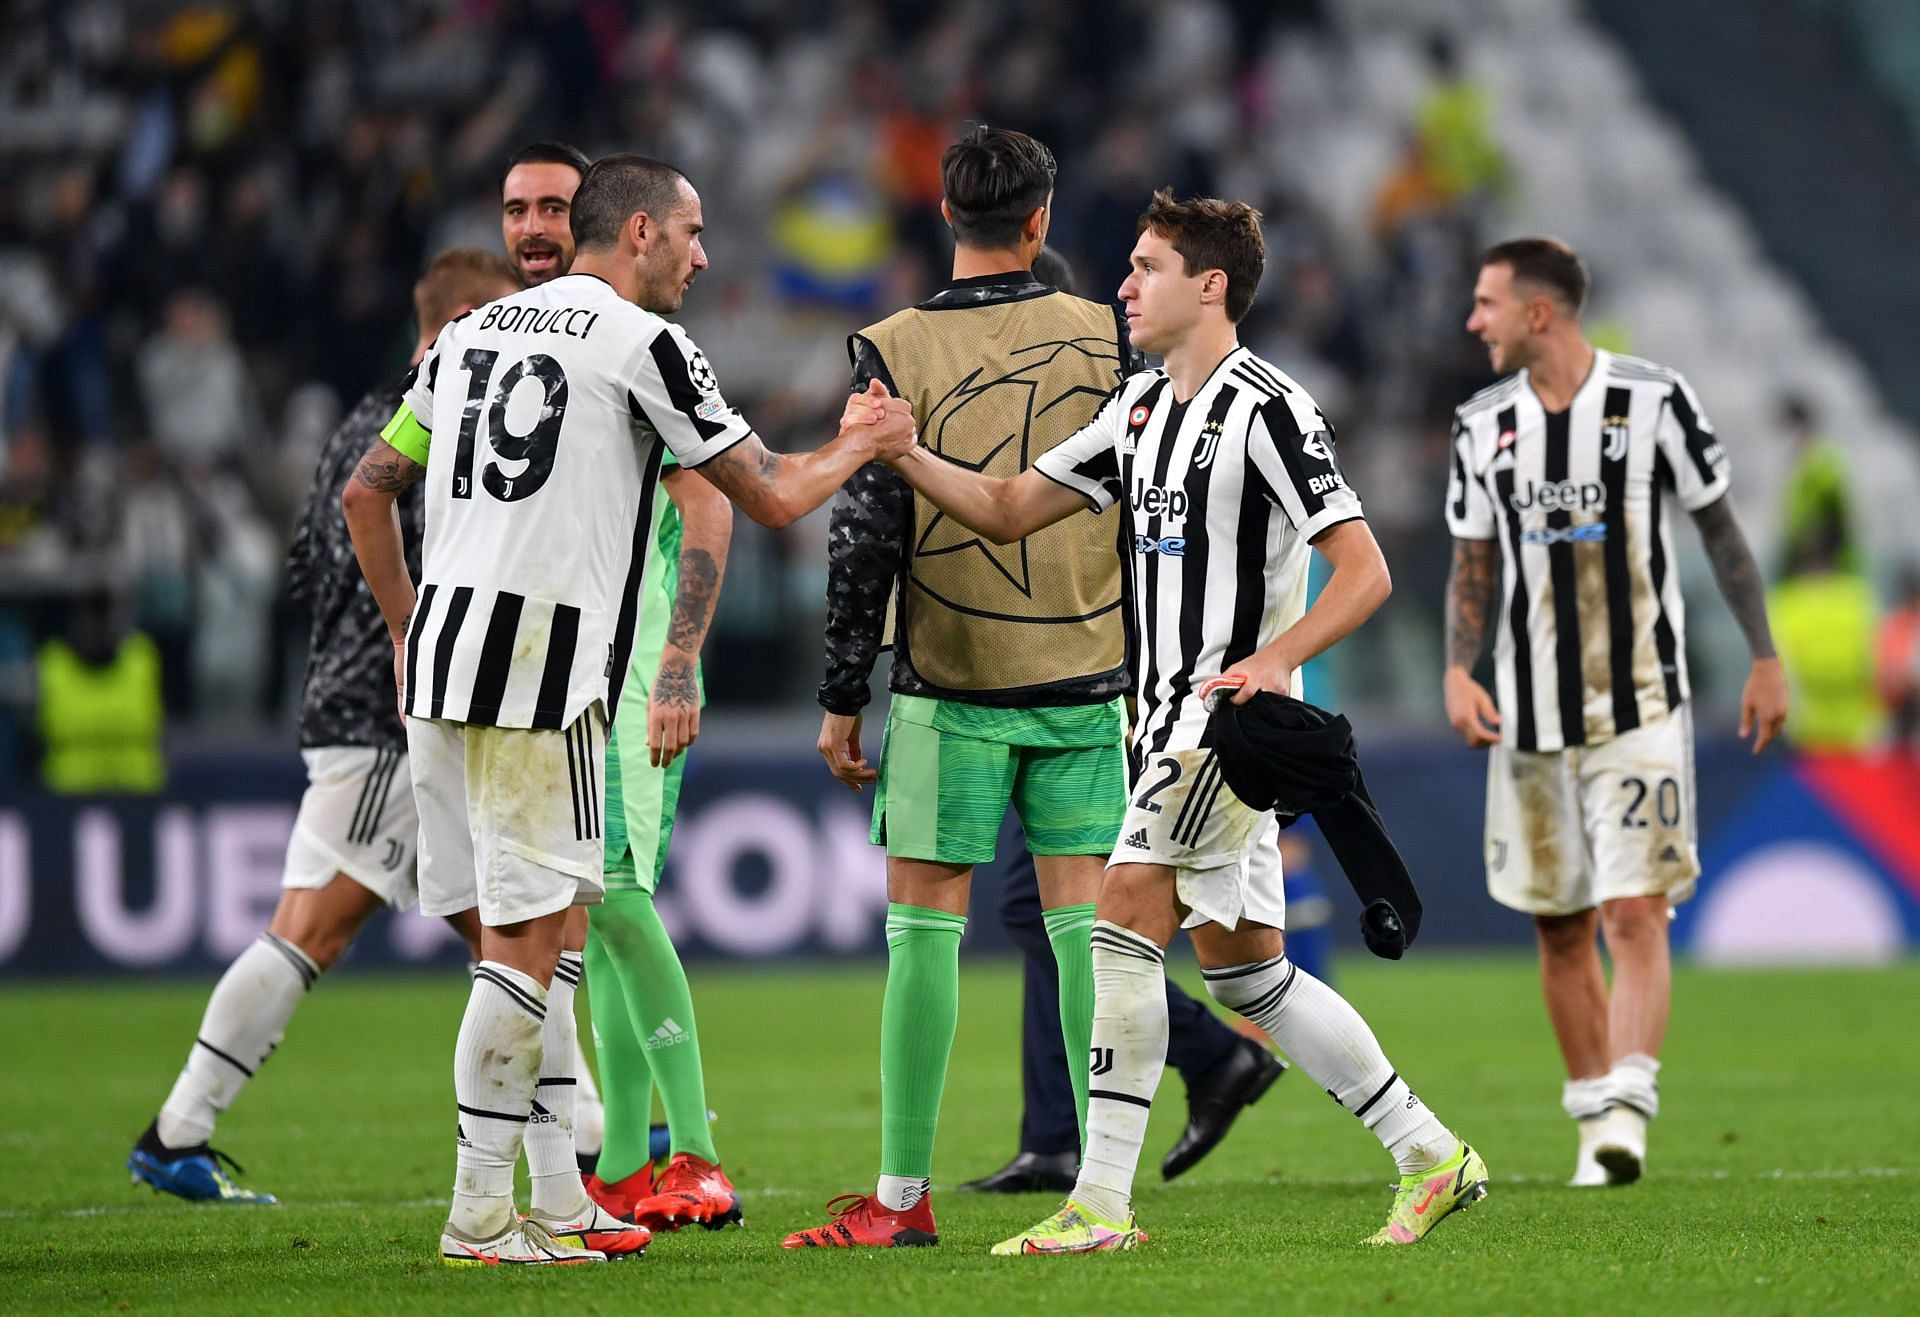 Juventus take on Zenit in a UEFA Champions League game on Wednesday